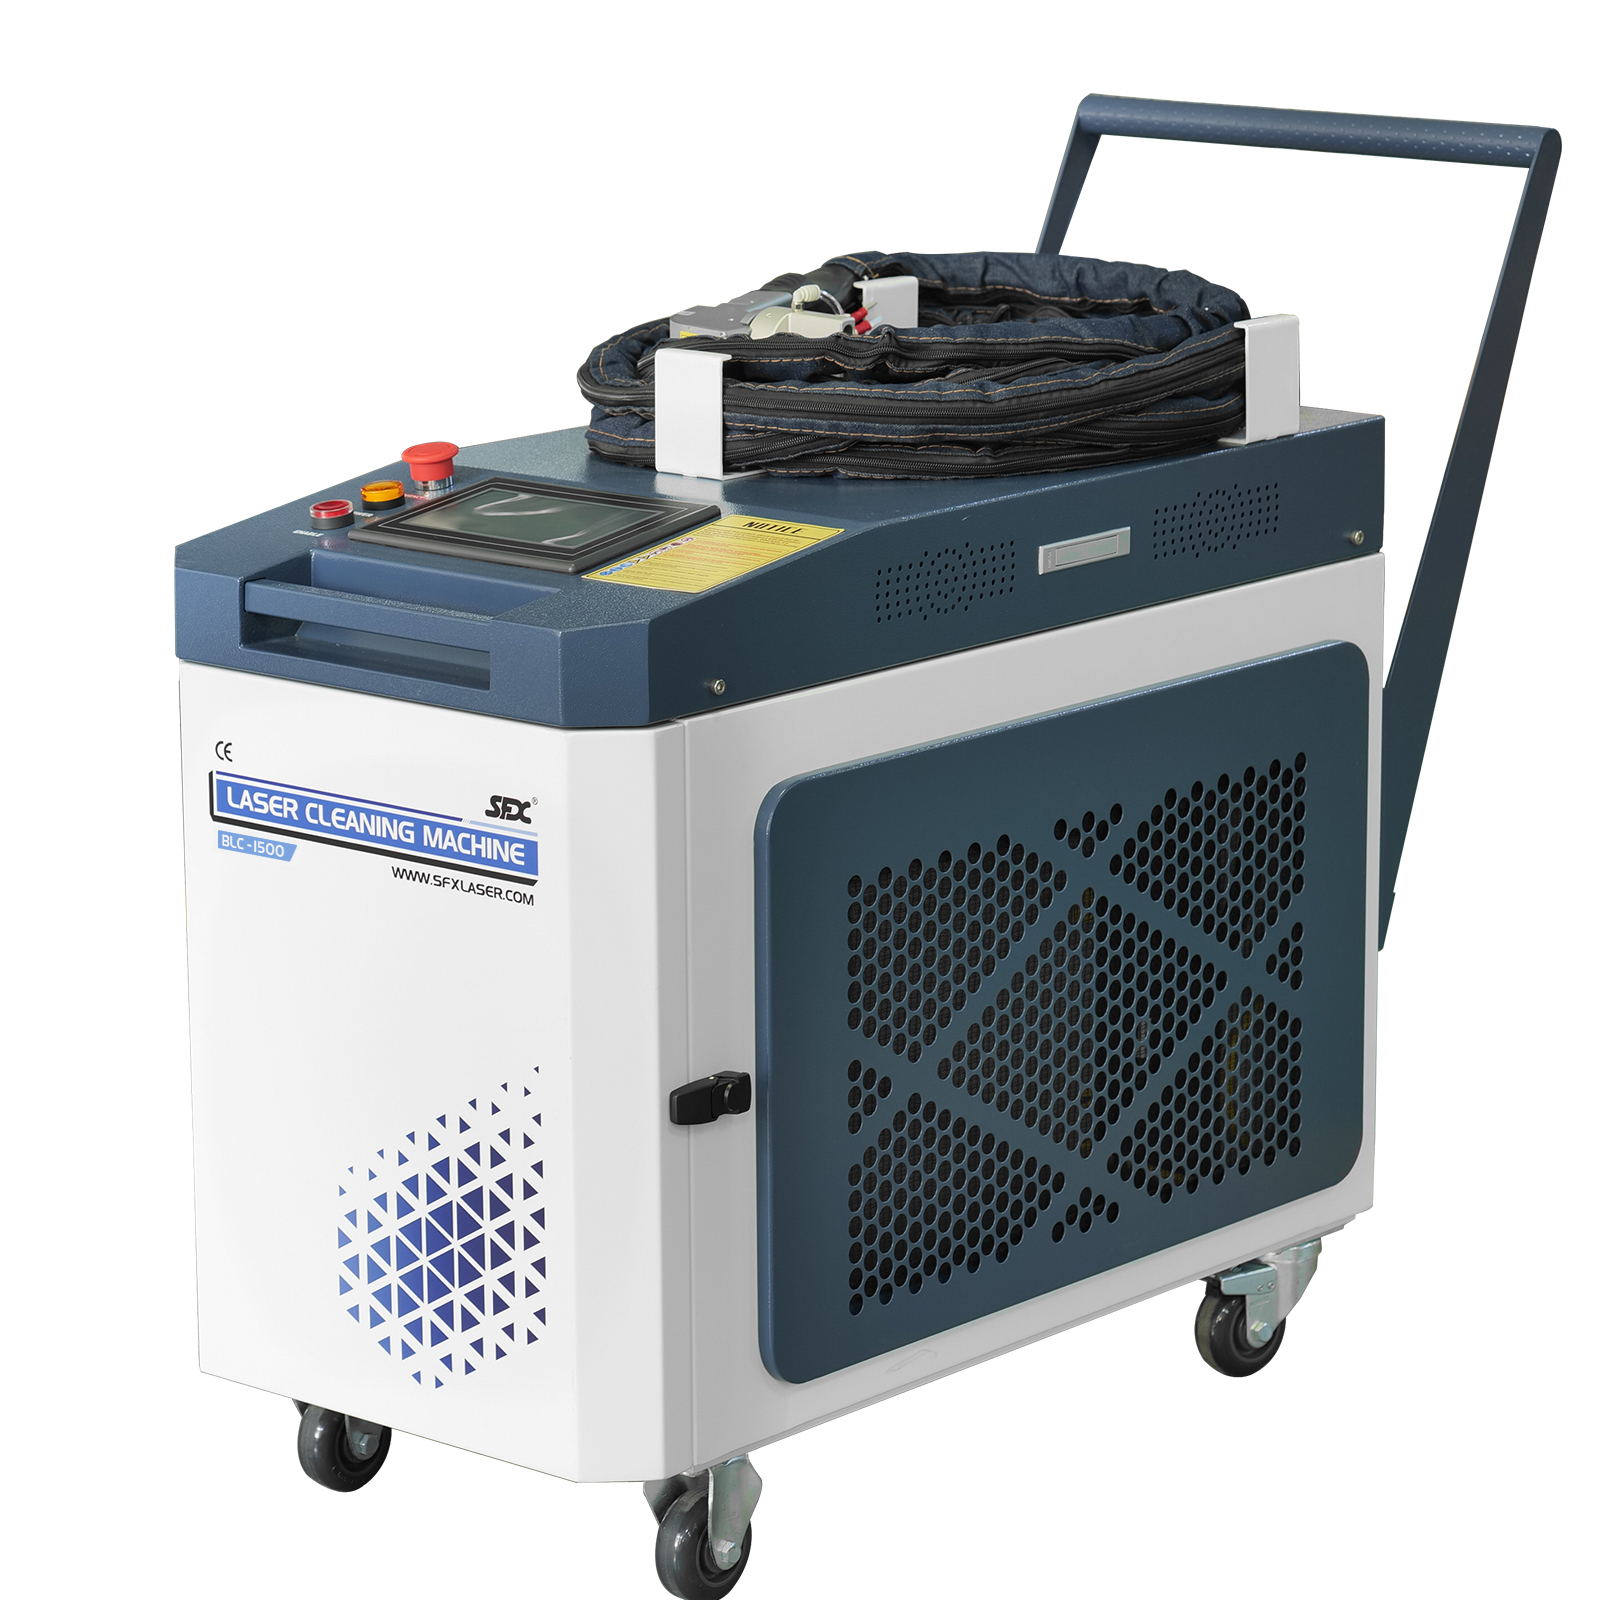 SFX Laser 200W Pulsed Laser Cleaning Machine for Rust Removal